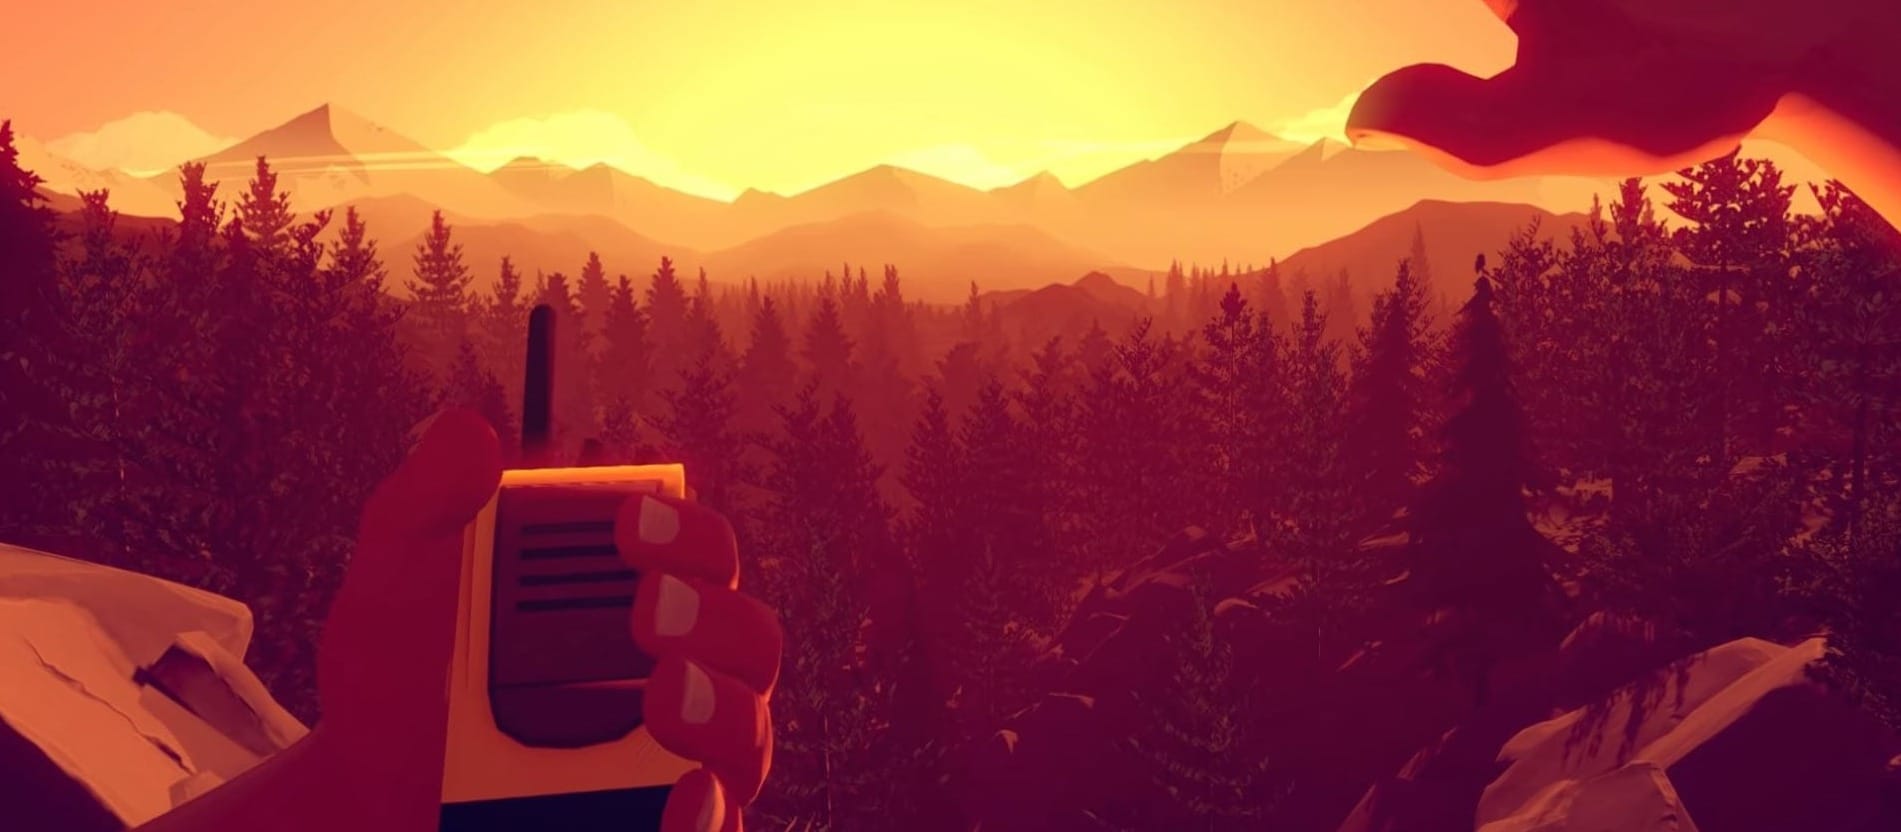 A screenshot from the Firewatch game, with the main chatacter from the first person view talks to the hand radio and covers his eyes with a hand looking at beautiful sunset in the mountain horizon.